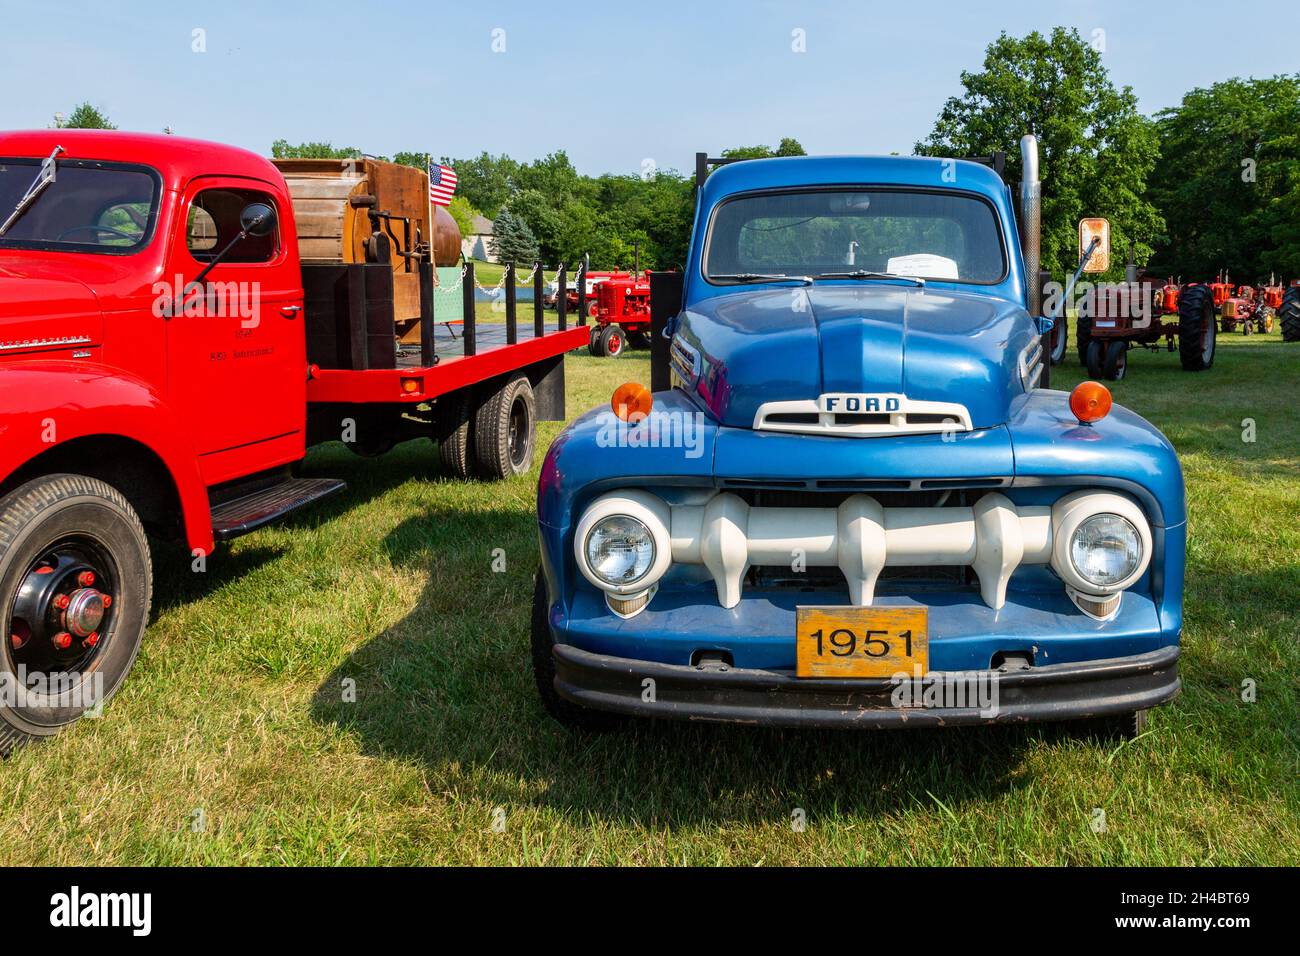 A blue antique 1951 Ford truck on display at a show in Warren, Indiana, USA. Stock Photo